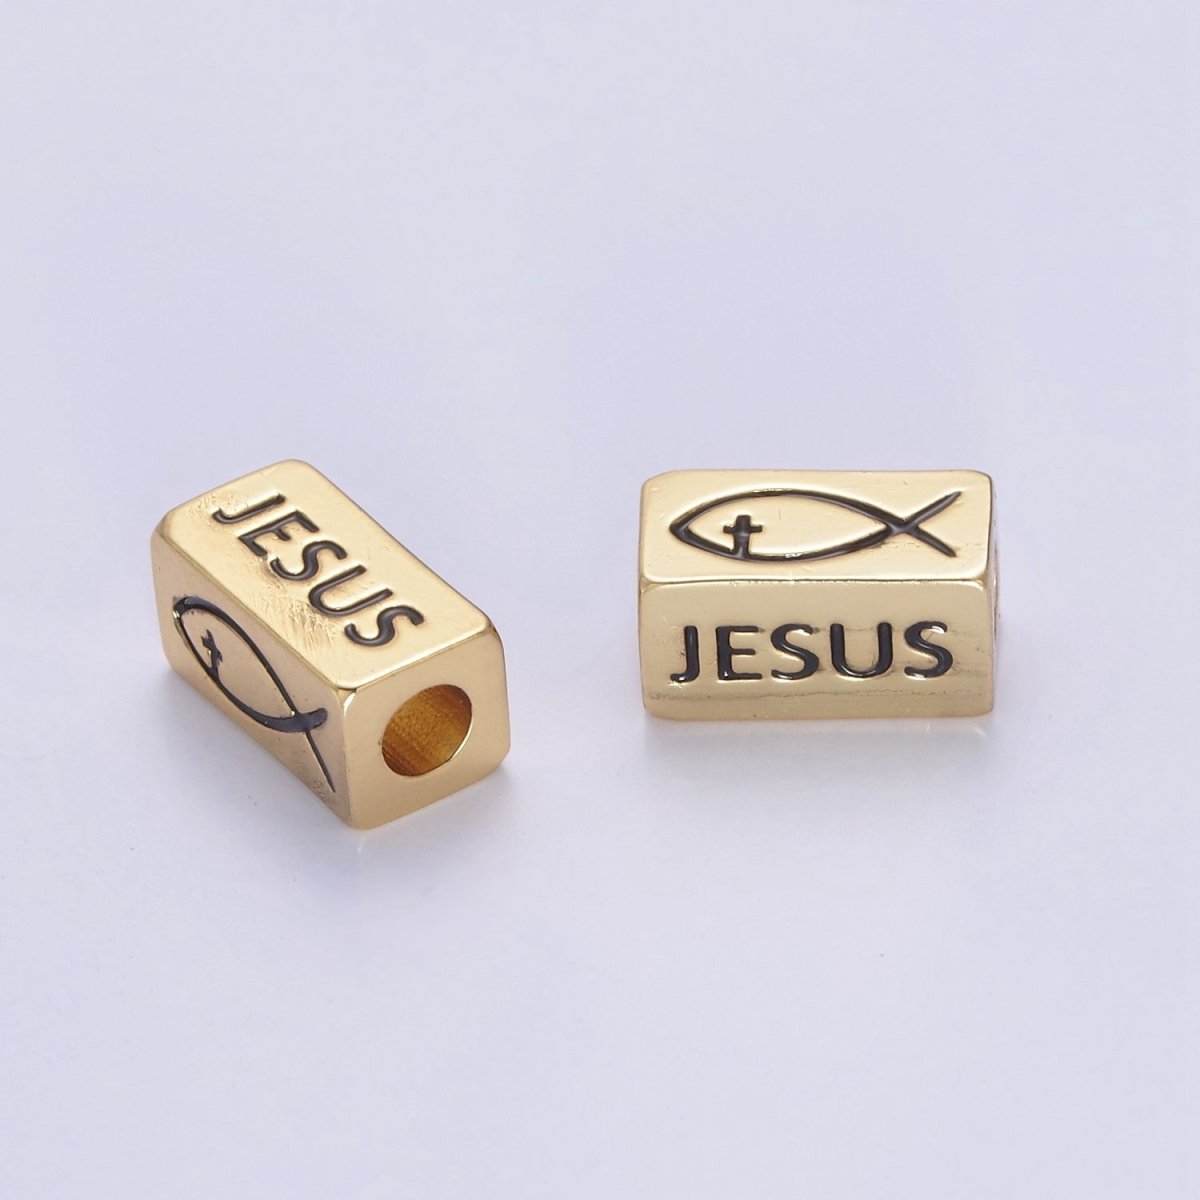 Dainty 14kt Gold Filled Religious Square Tube Bead - Seamless Rectangular Bead - Wholesale - Findings- Jewelry Making Spacer Bead B-173 - DLUXCA